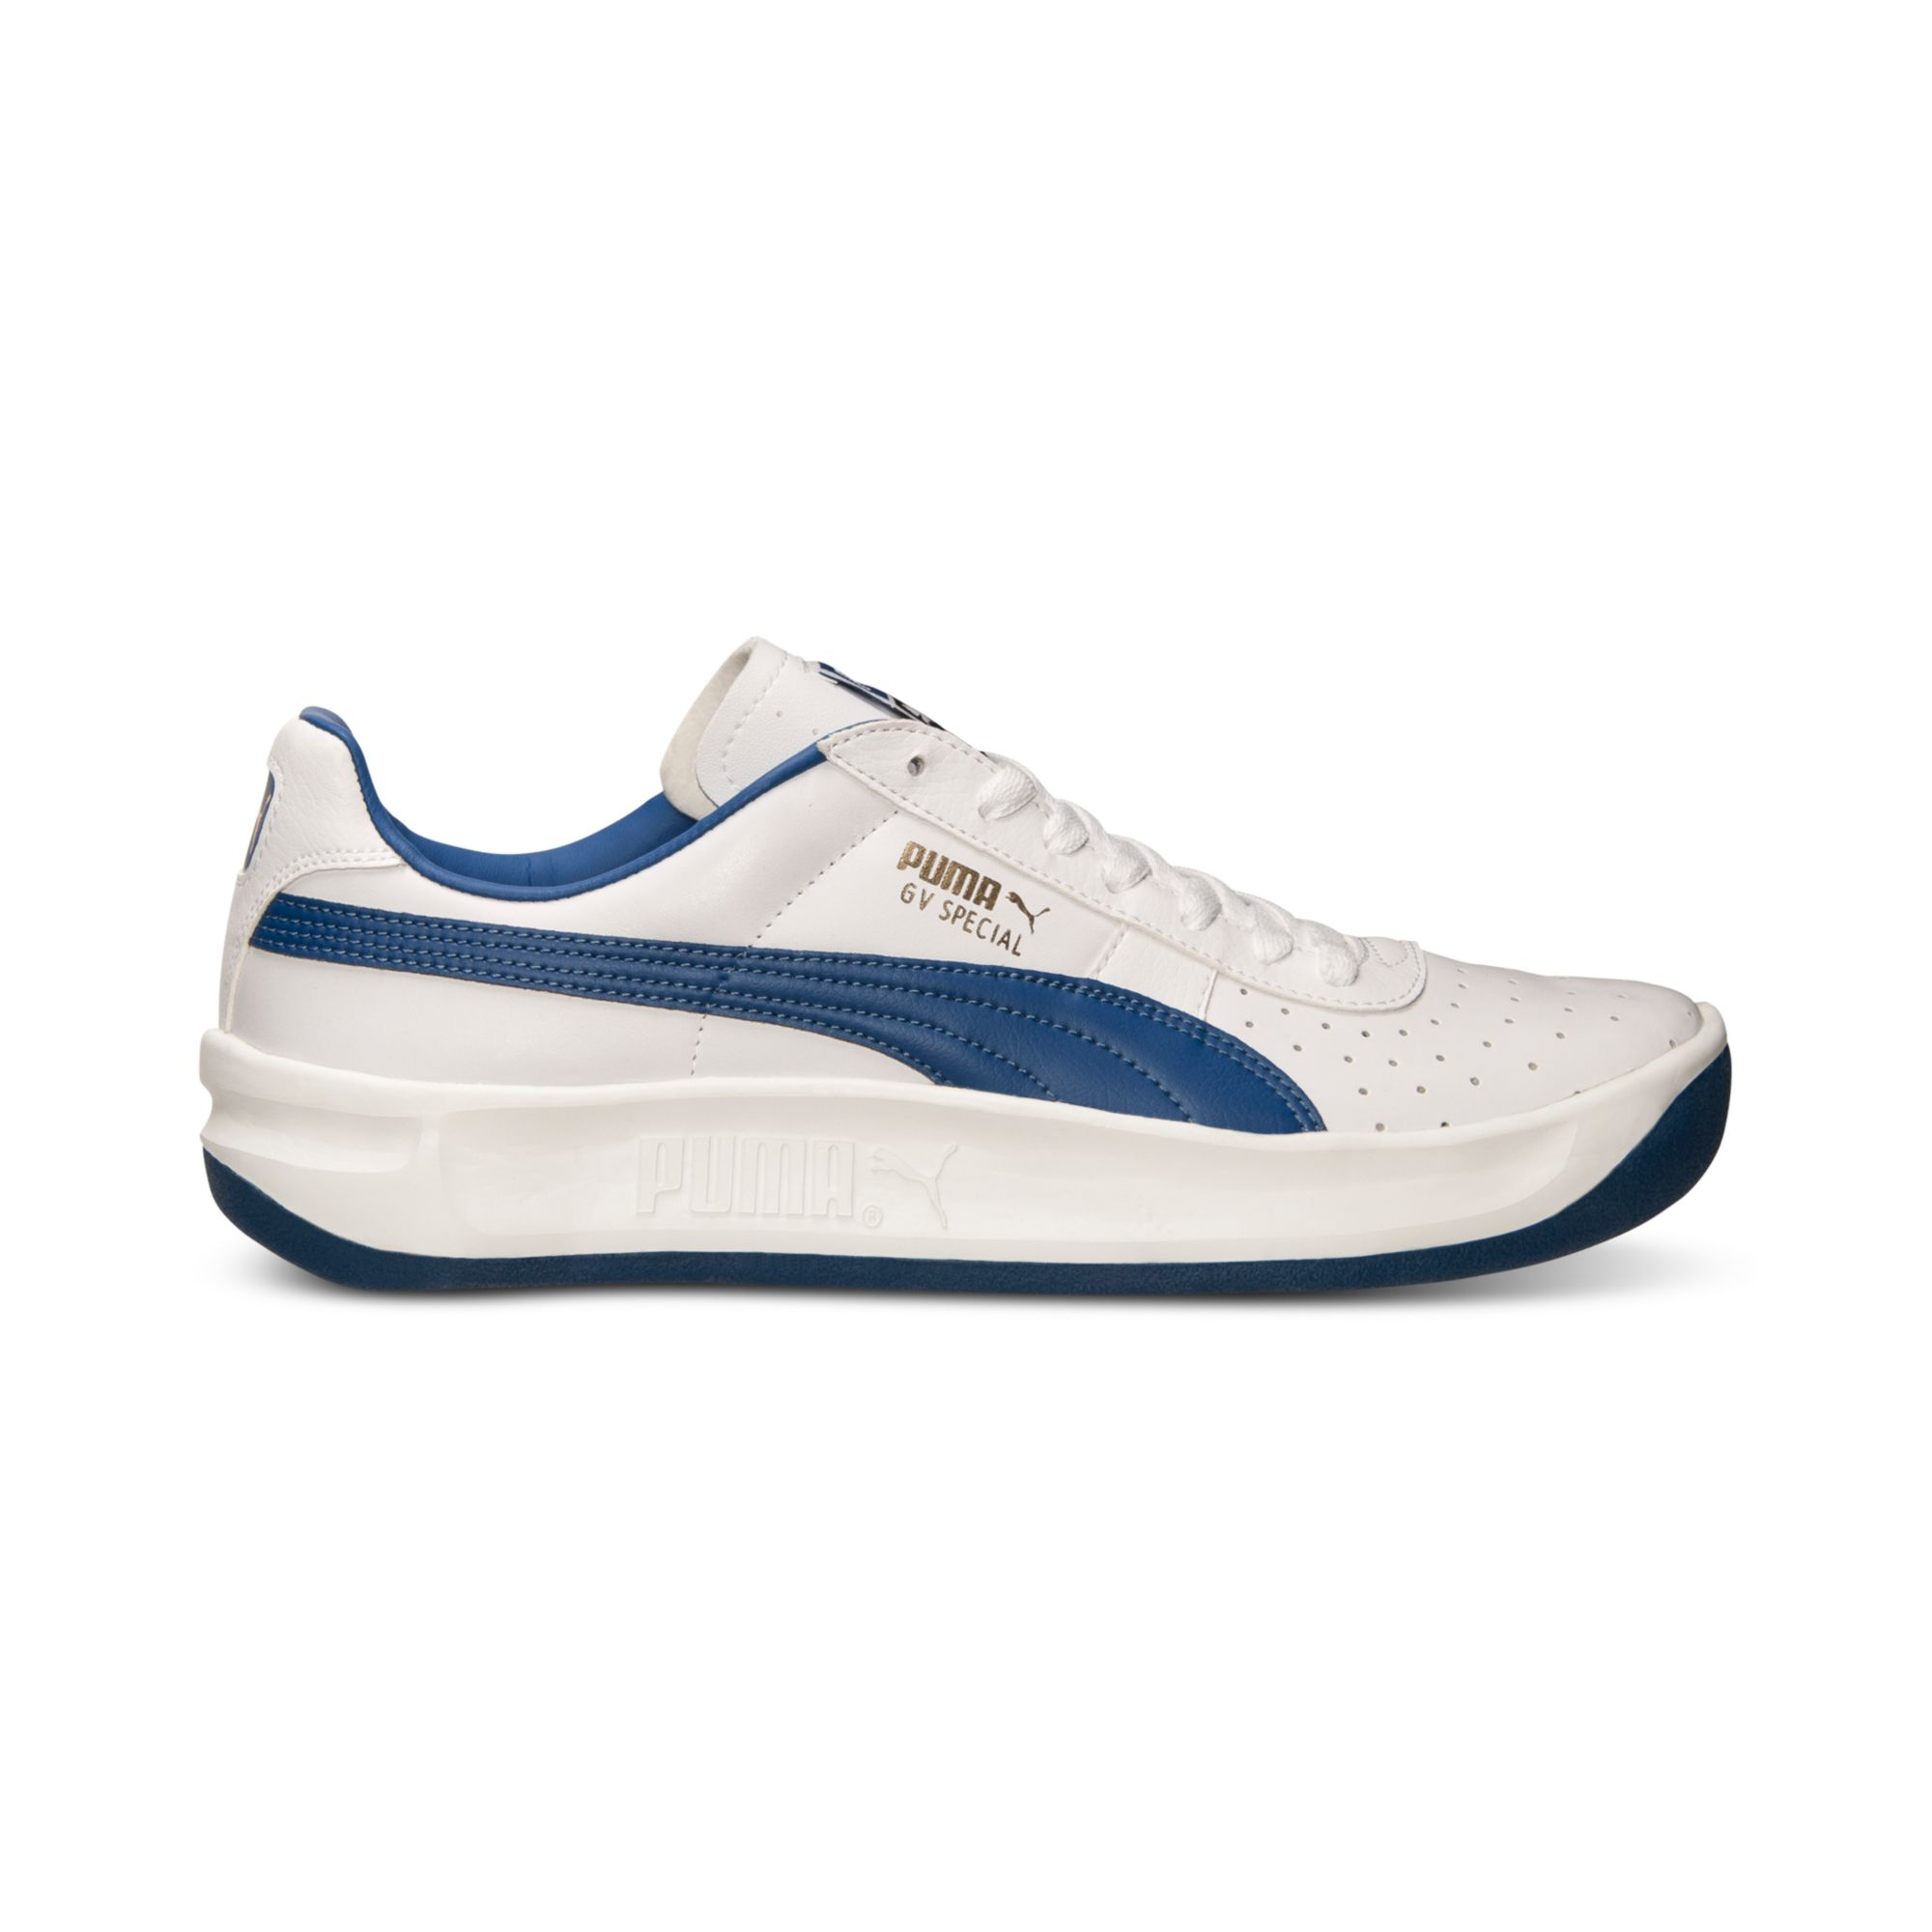 Puma Mens The Gv Special Casual Sneakers From Finish Line in Blue for ...